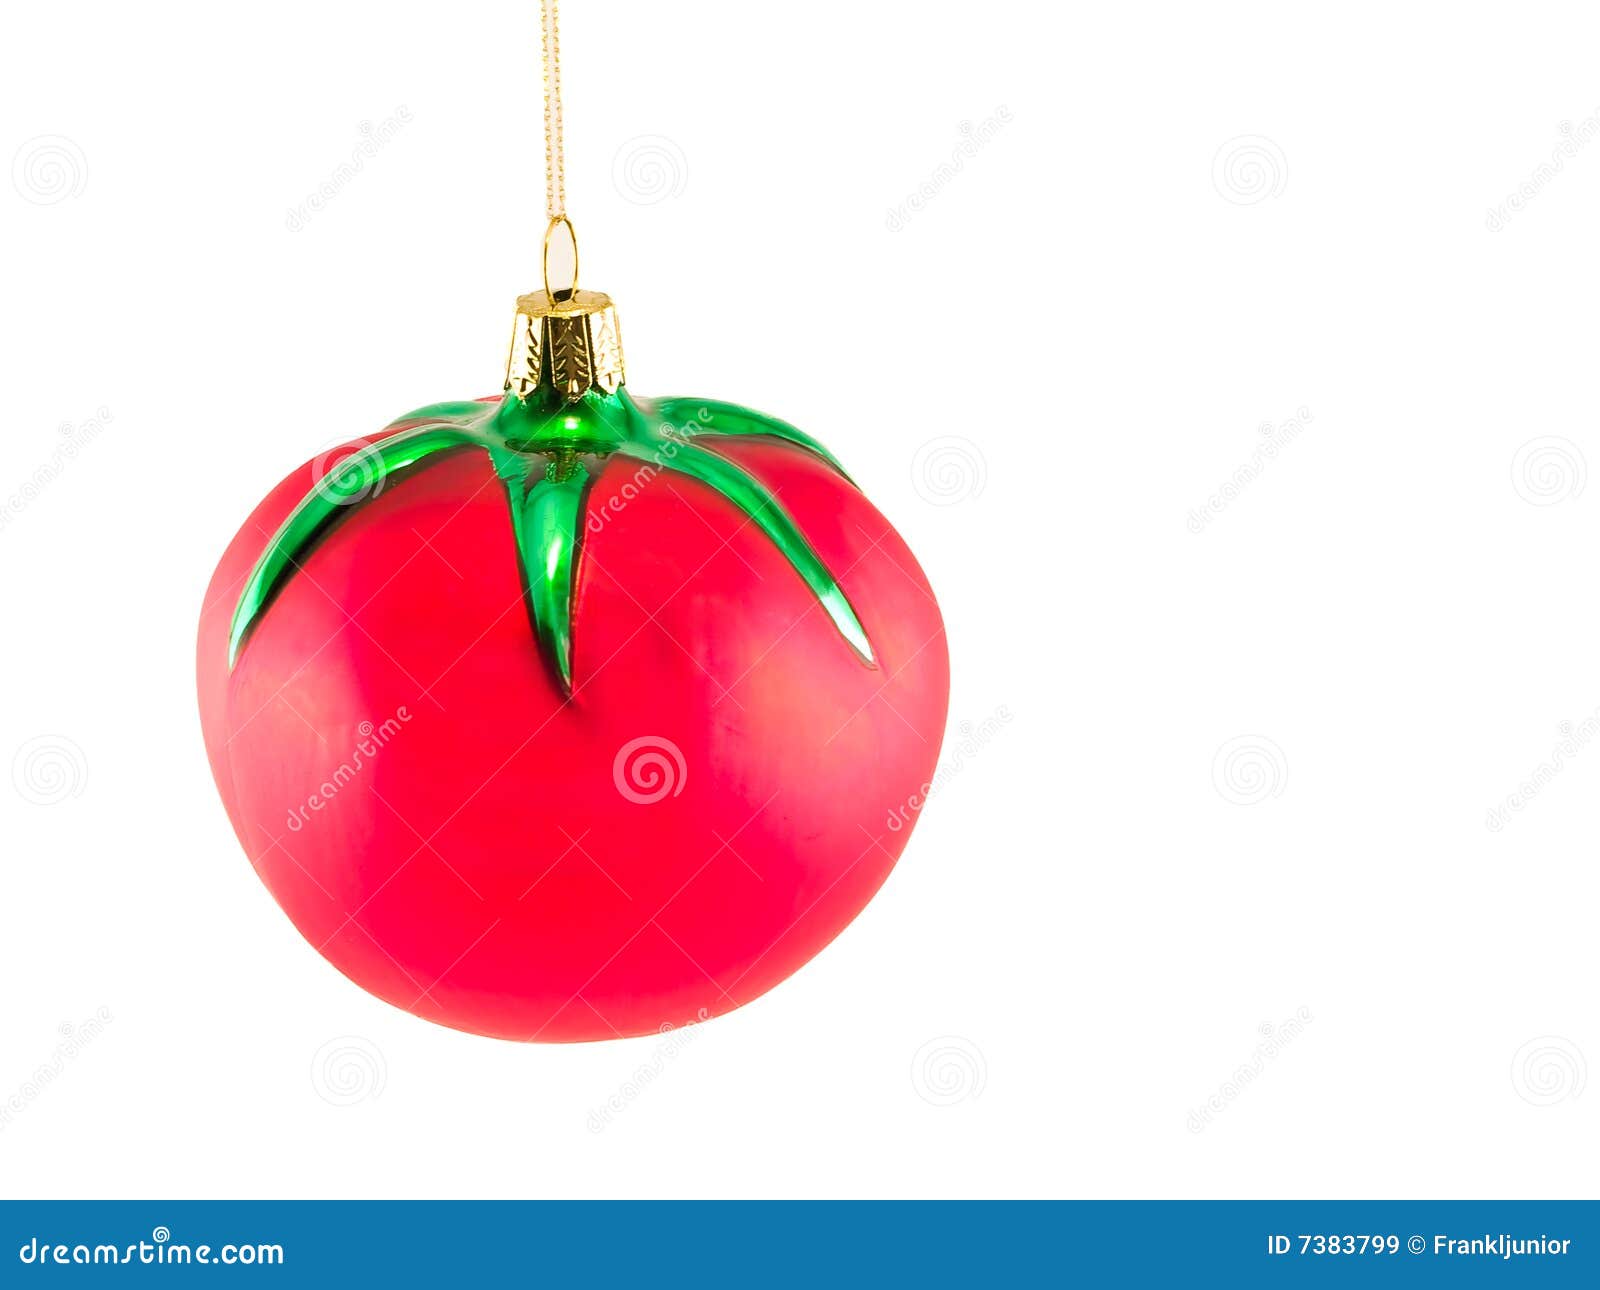 Christmas Tomato Ornament 1 Royalty Free Stock Images 